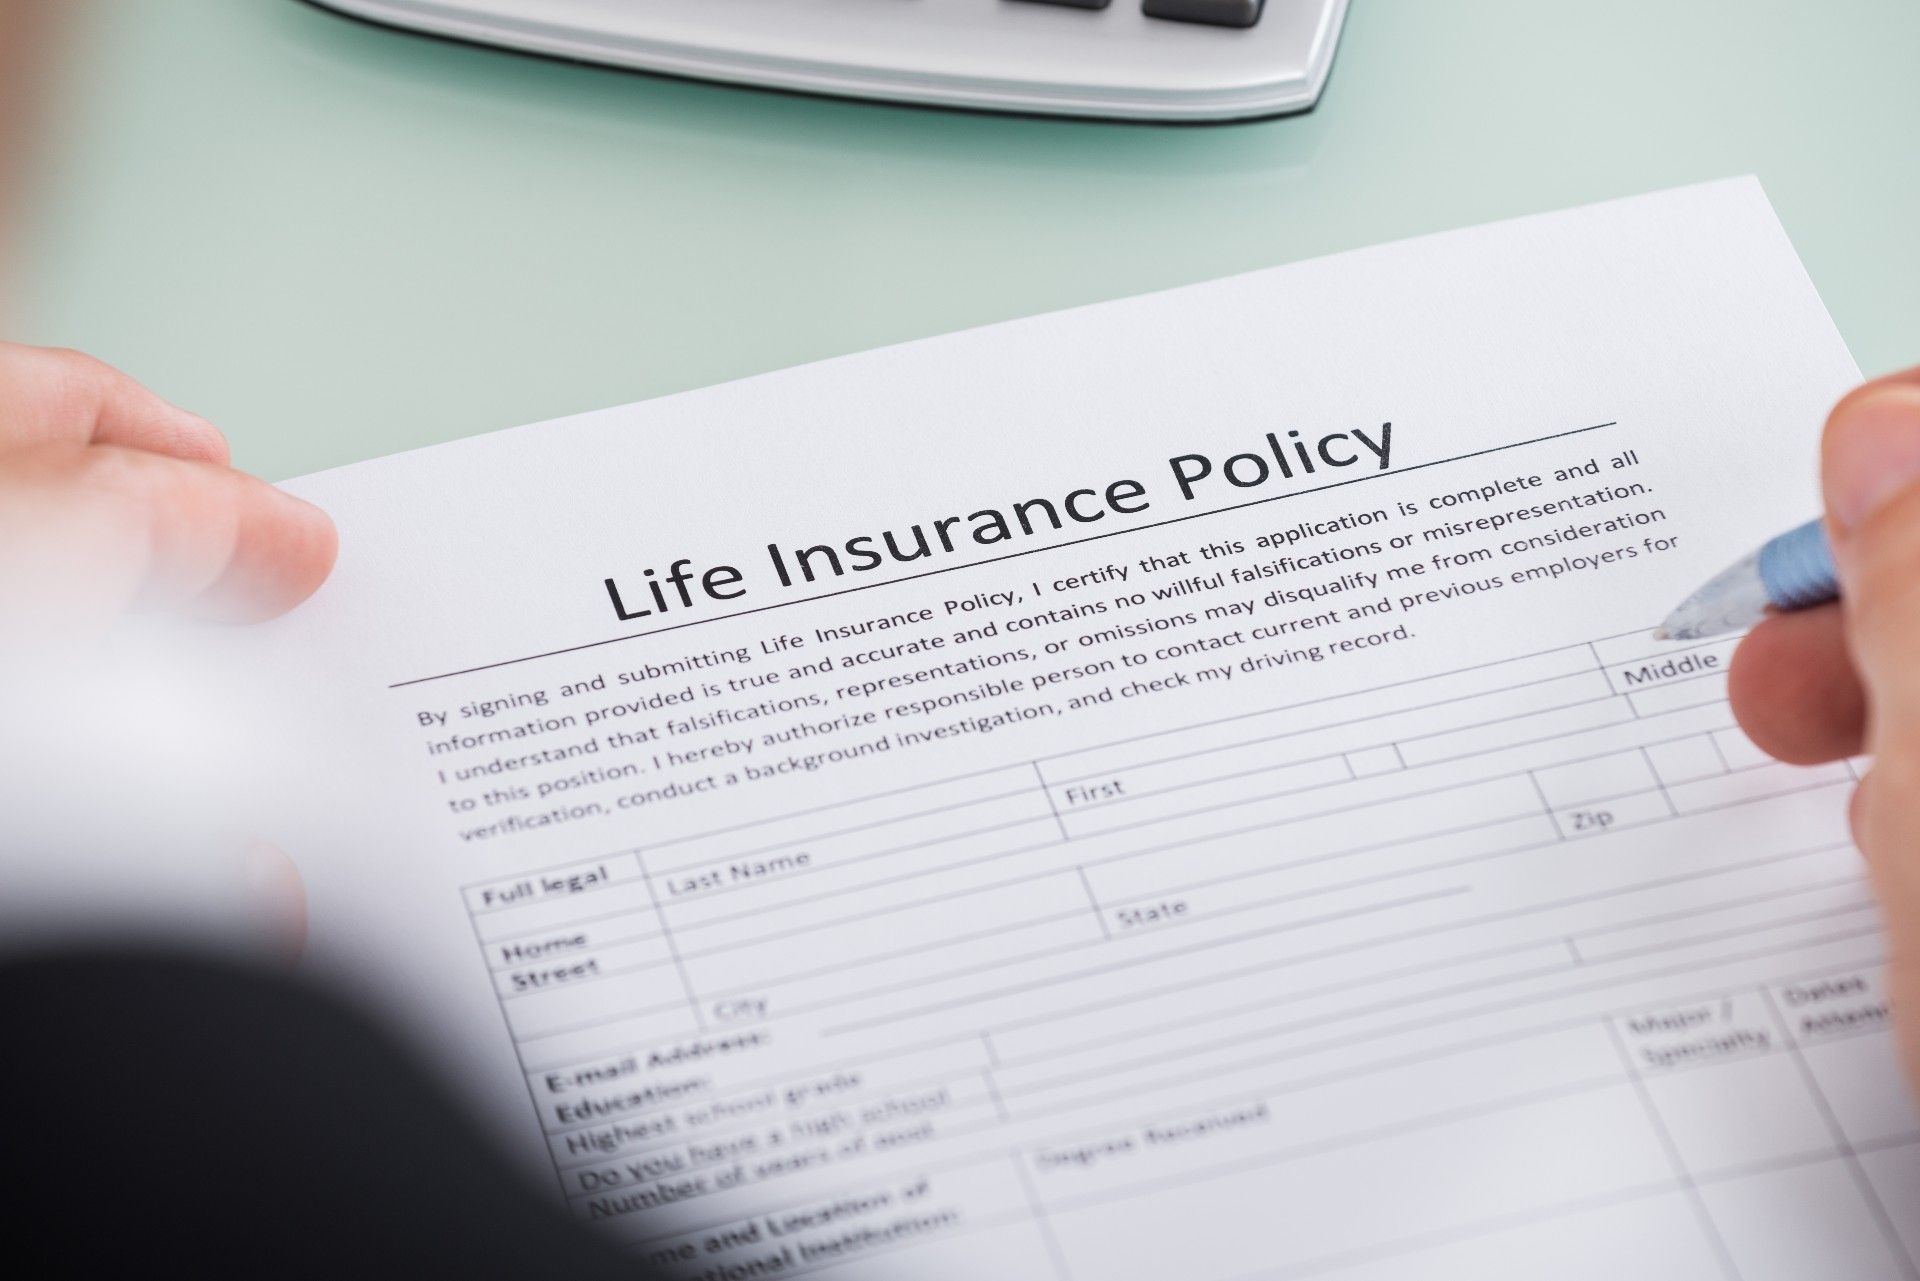 Closeup of a person's hand filing out life insurance policy paperwork - pacific life insurance company